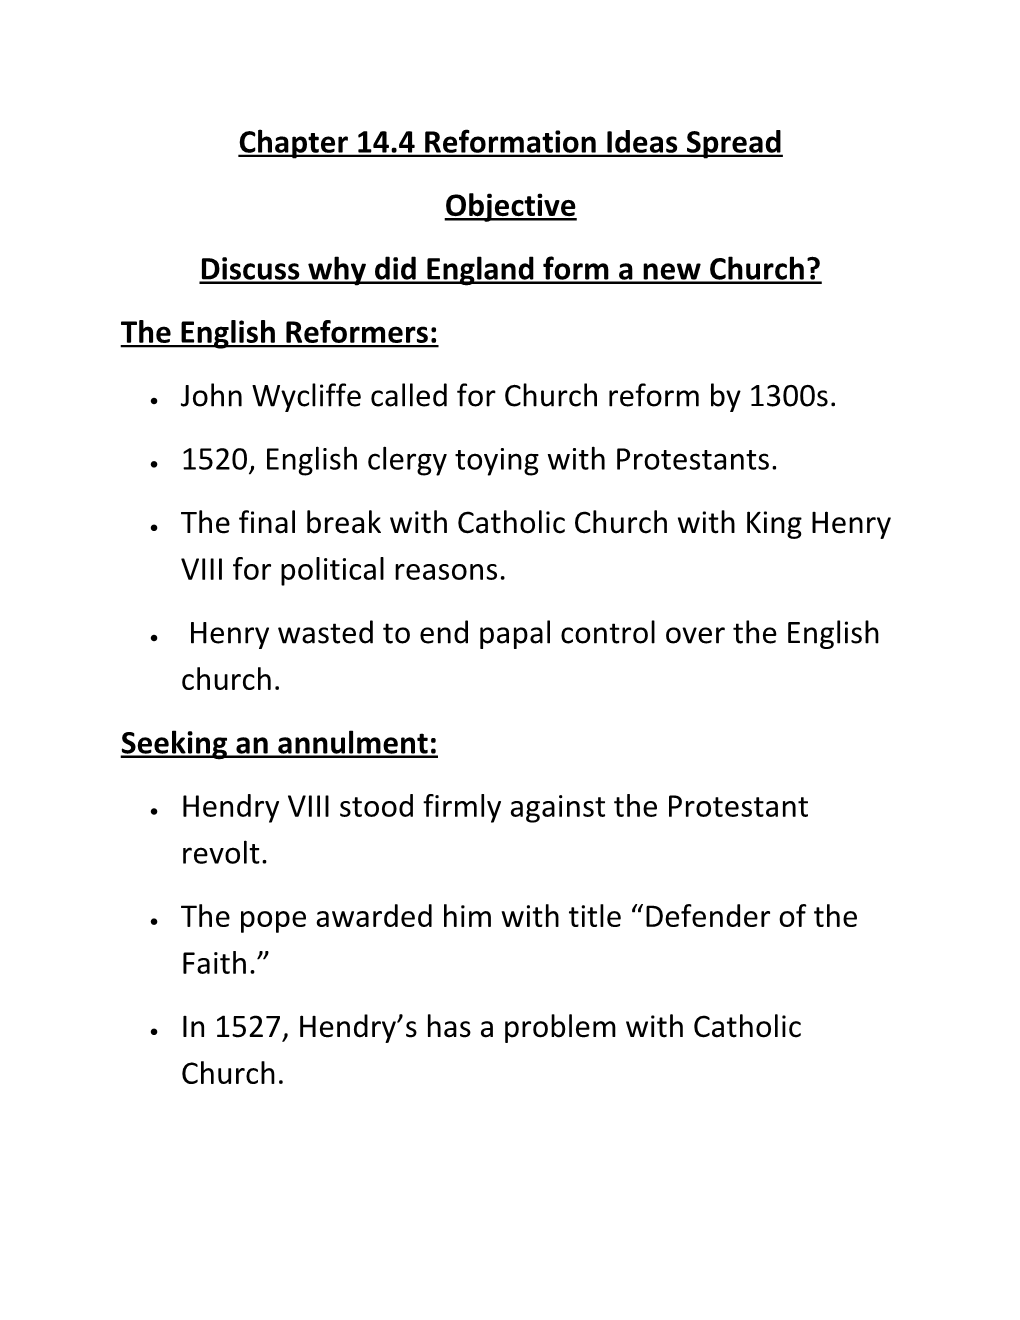 Discuss Why Did England Form a New Church?